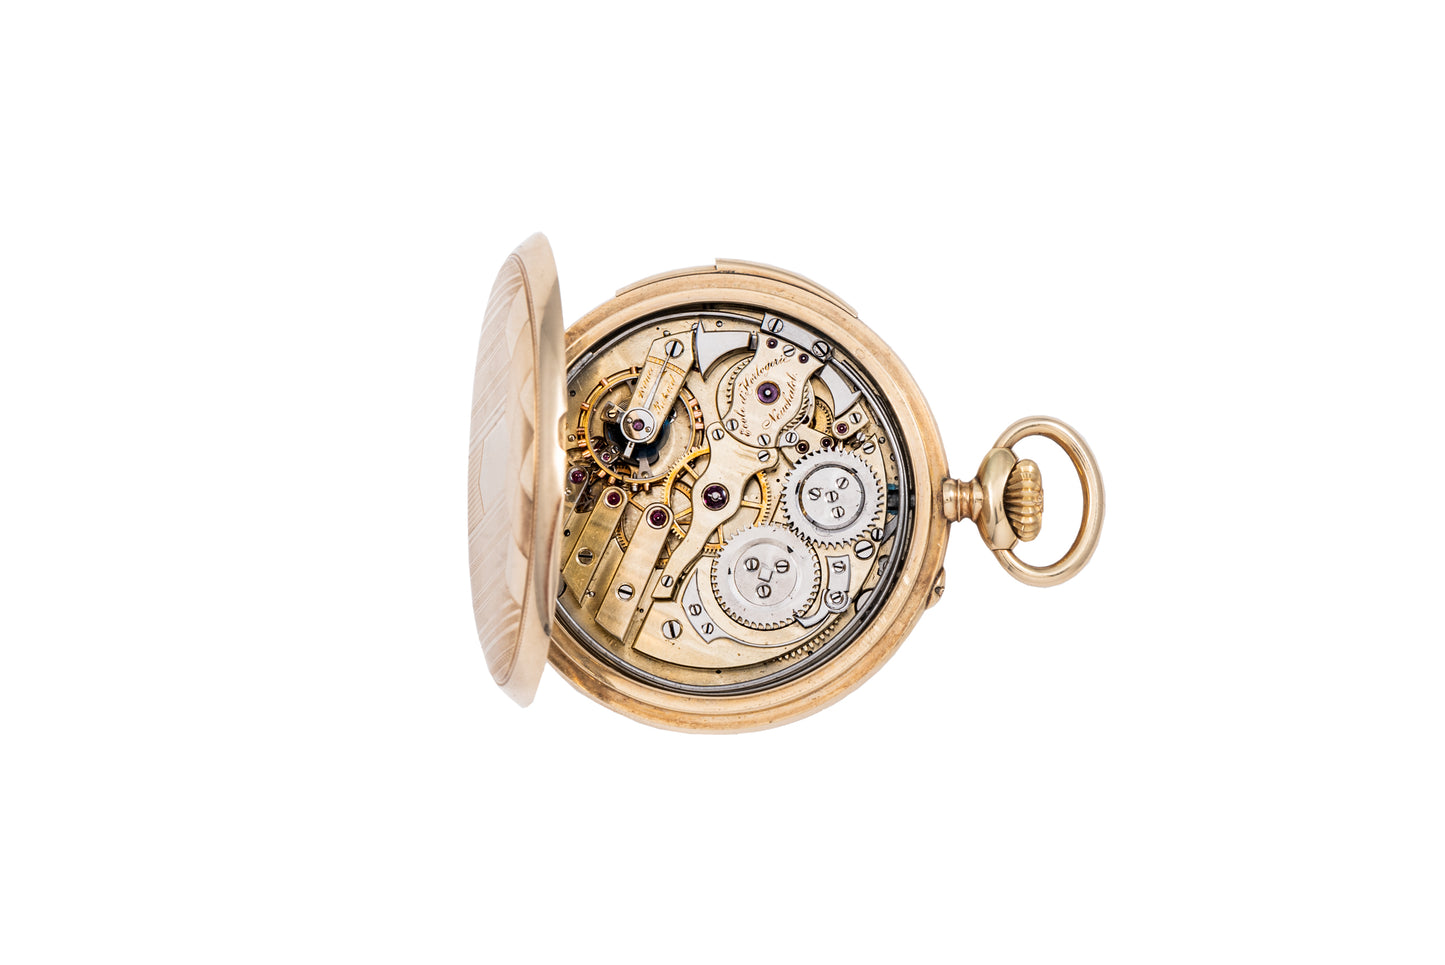 L'Ecole Horologie Minute Repeater Pocketwatch